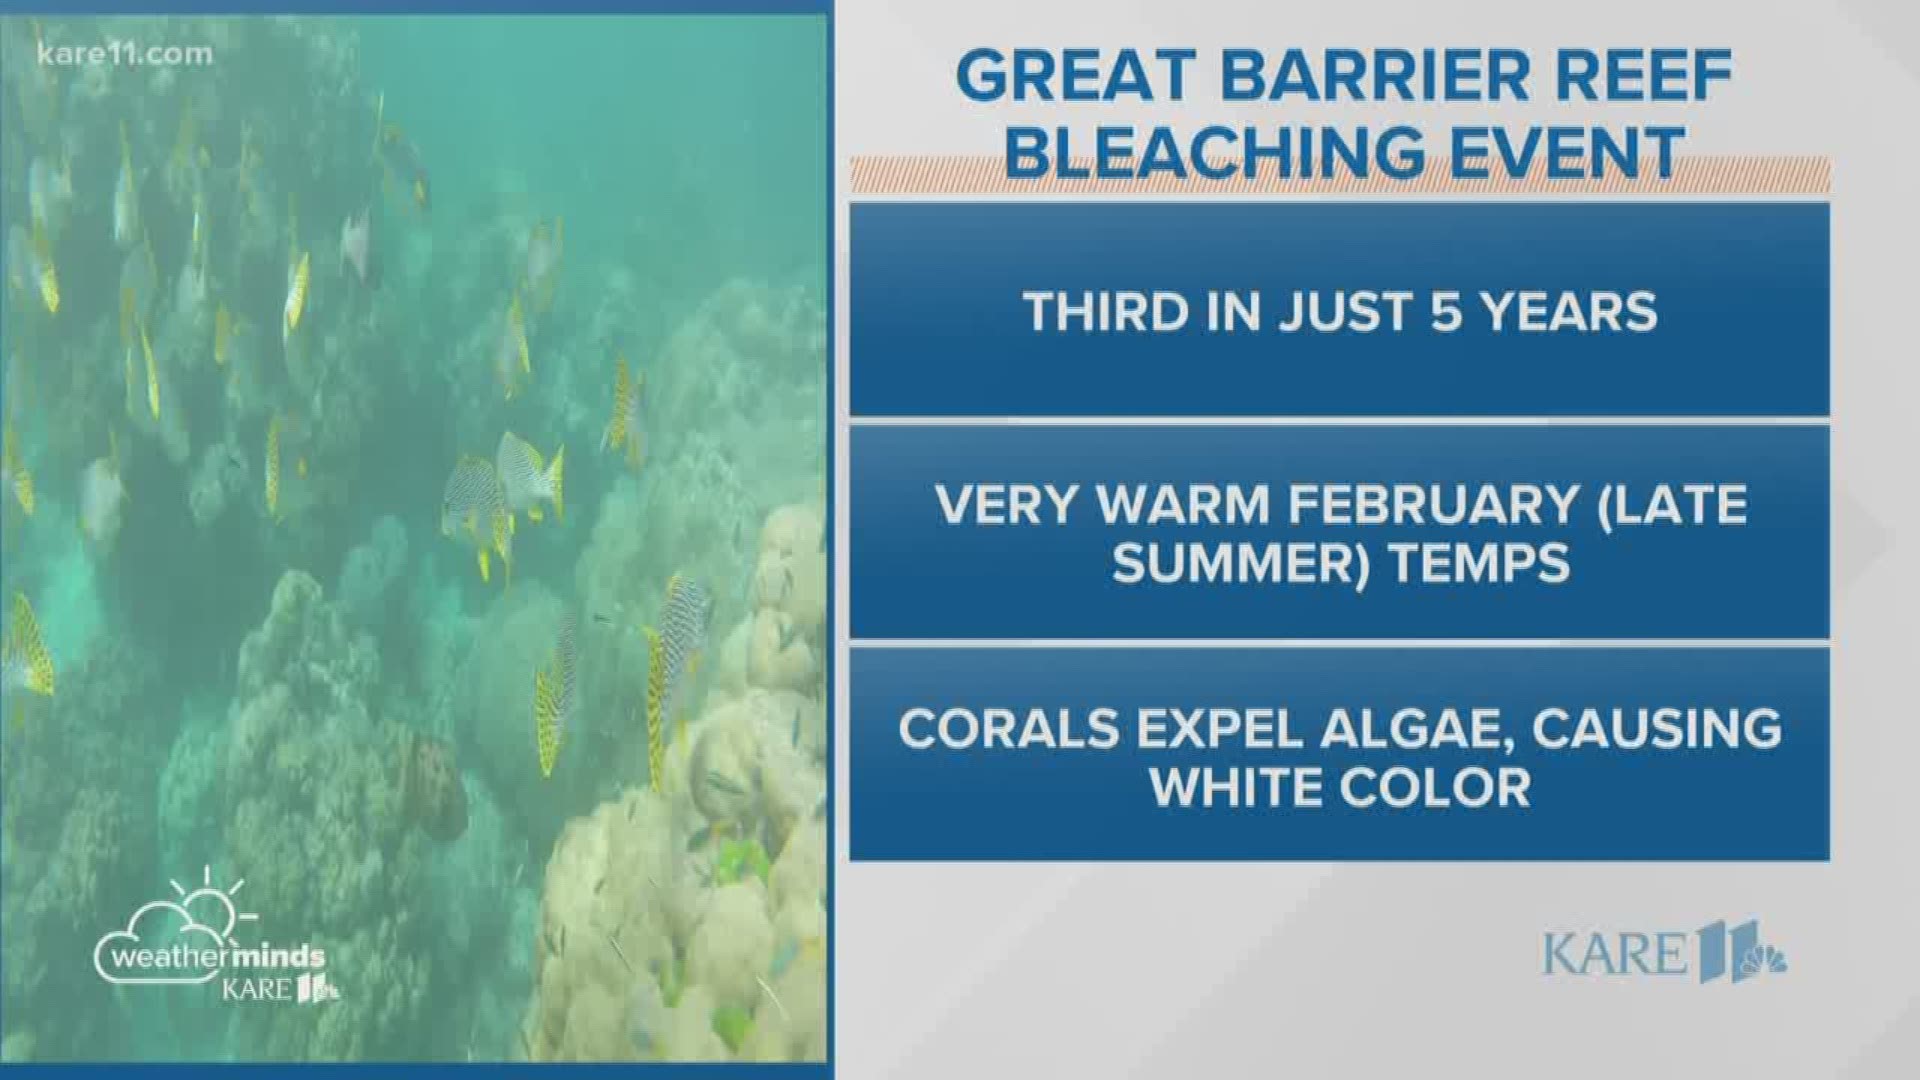 Warmer oceans are blamed for the 3rd report of mass coral reef bleaching in 5 years.